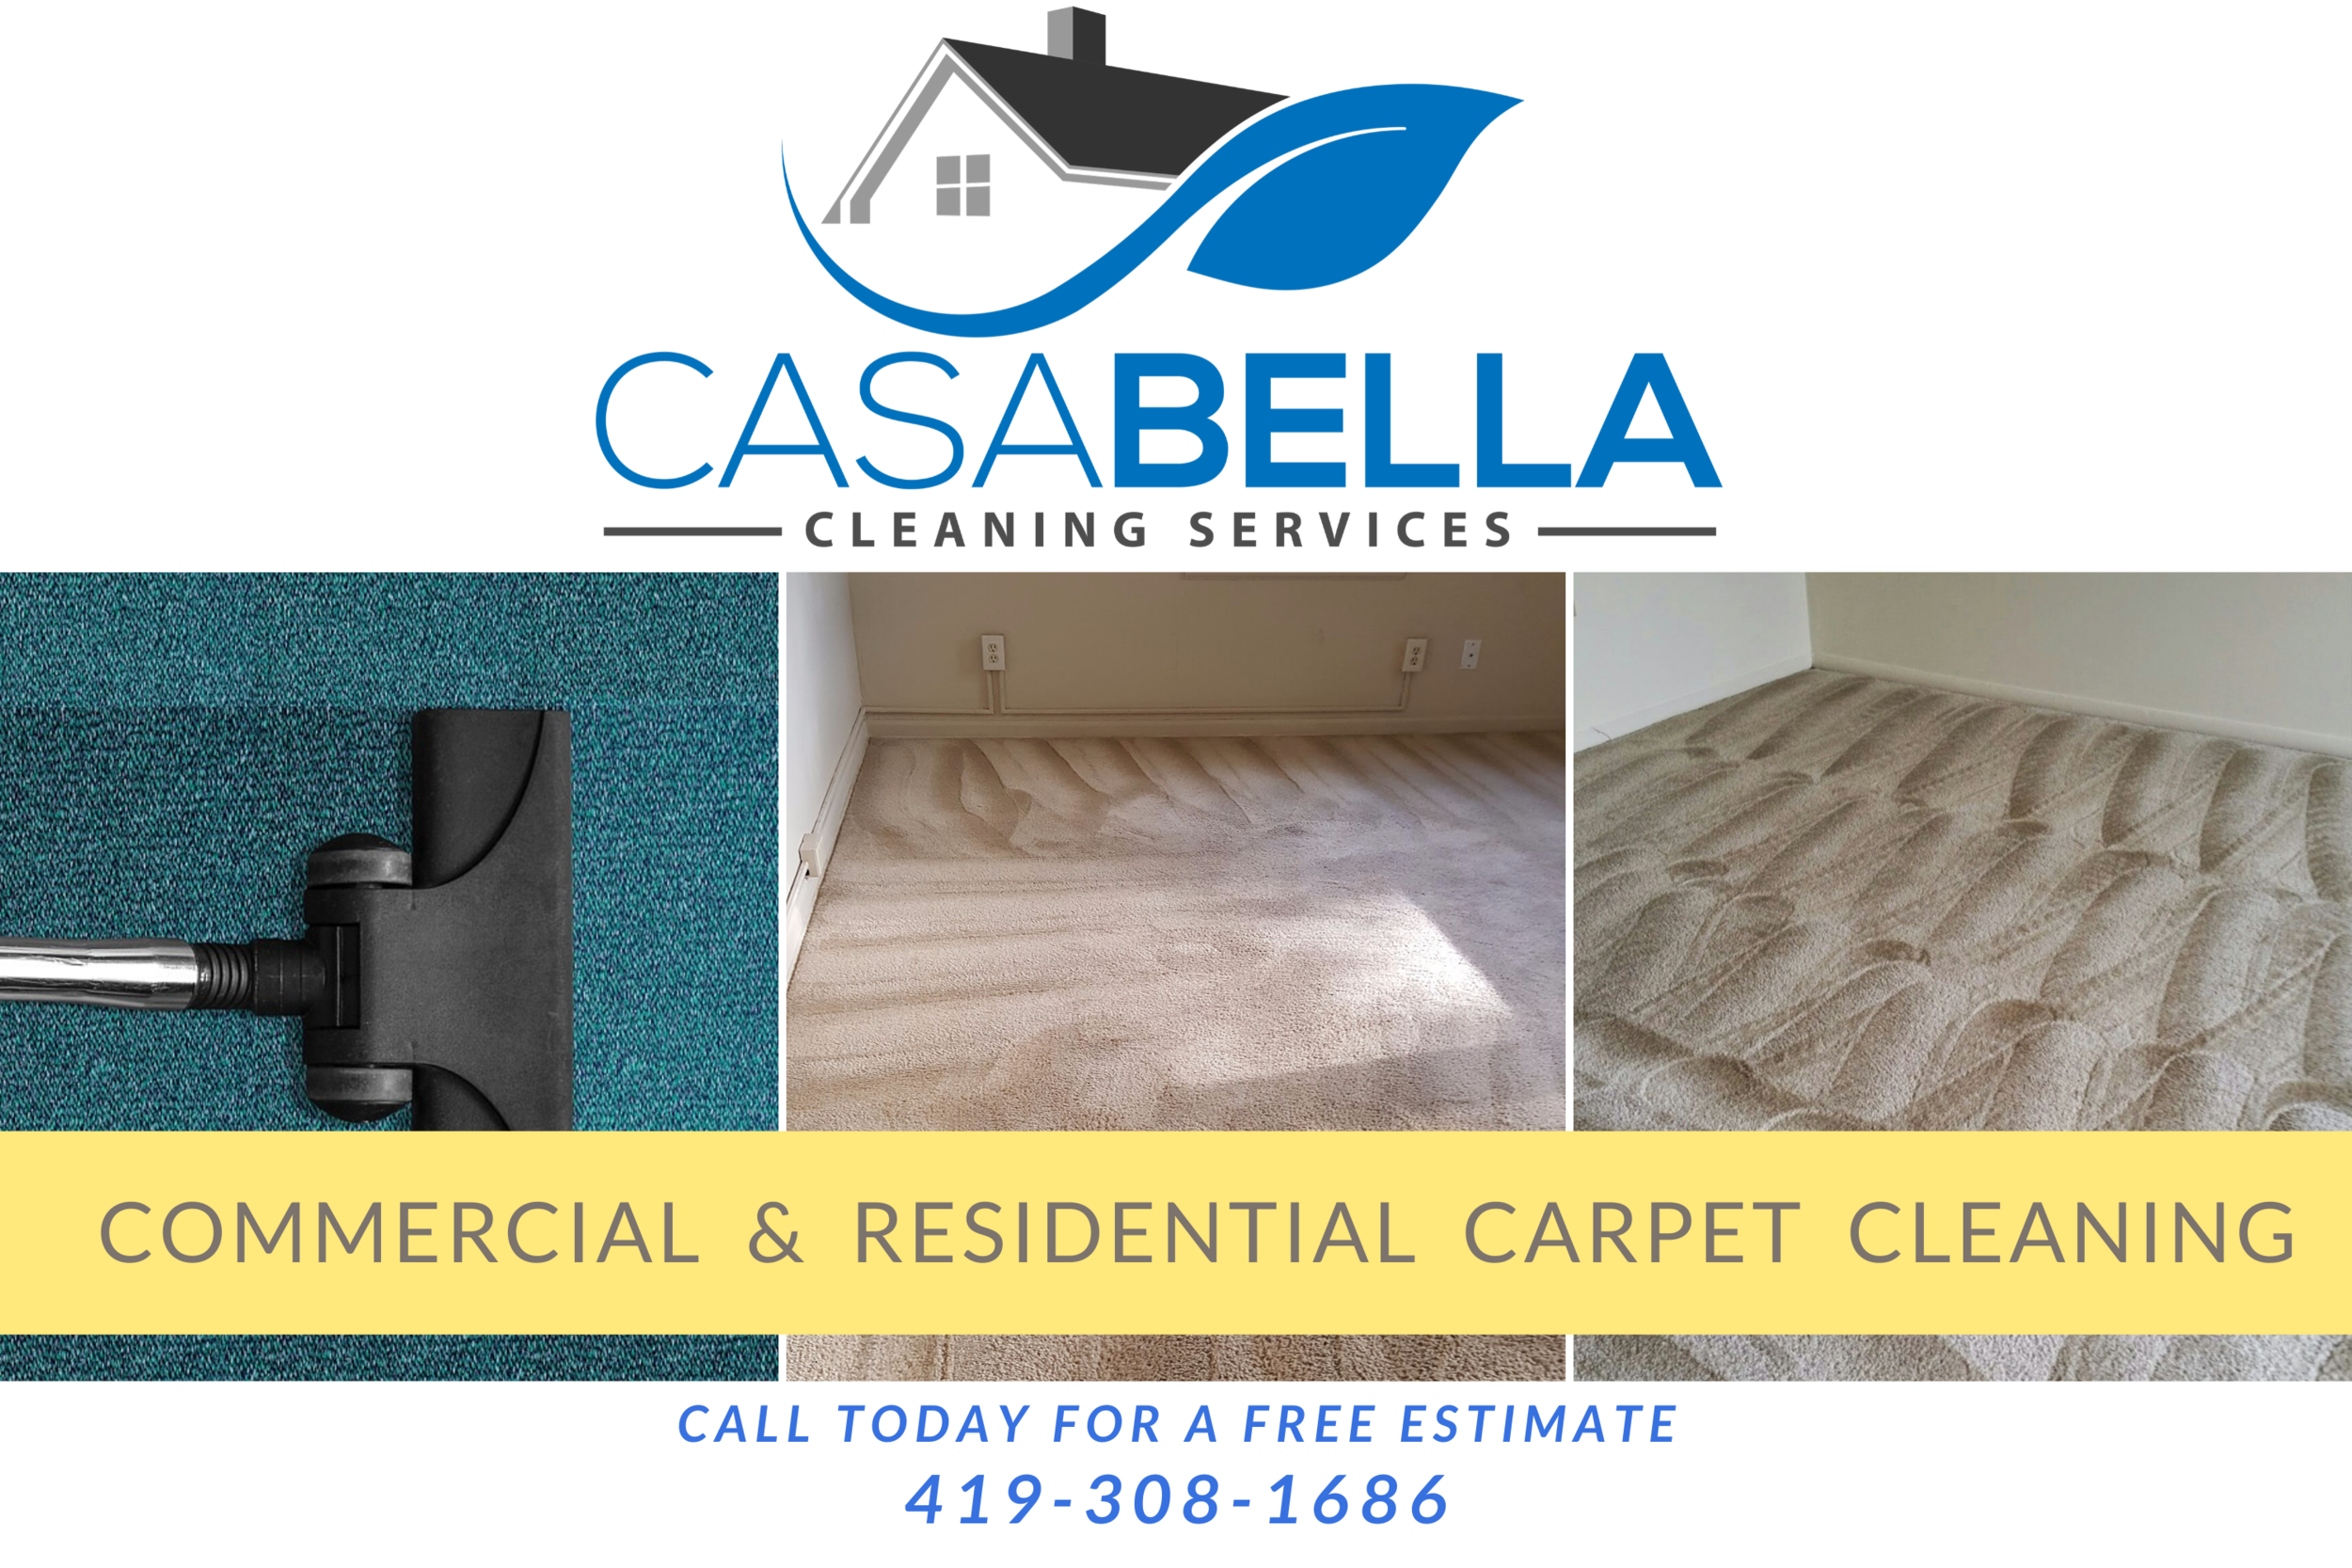 Carpet Cleaning — Casa Bella Cleaning